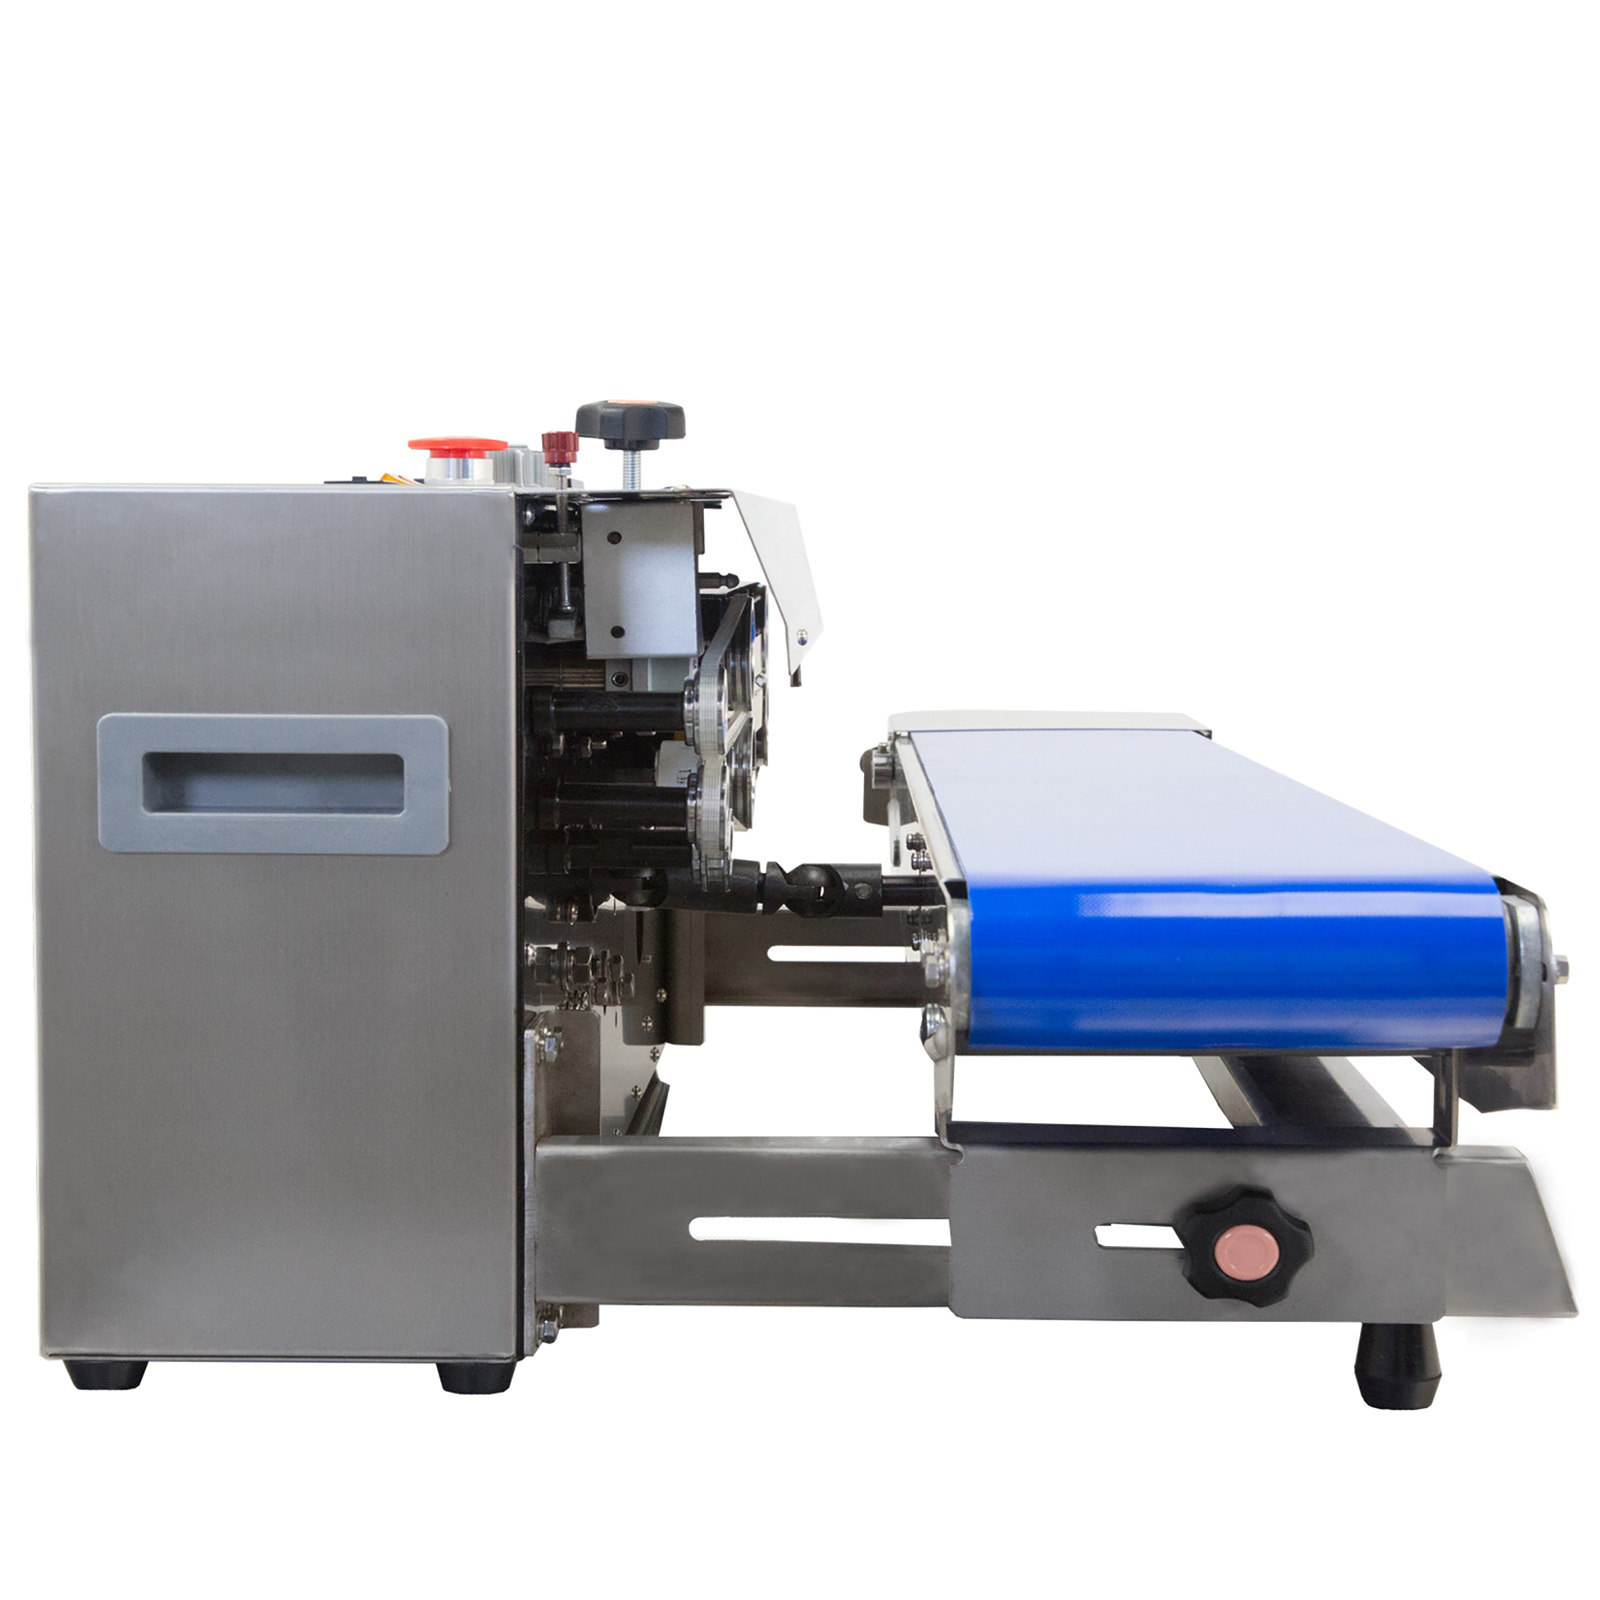 side view of stainless steel 200v continuous band sealer with coder and blue motorized conveyor belt set for horizontal applications